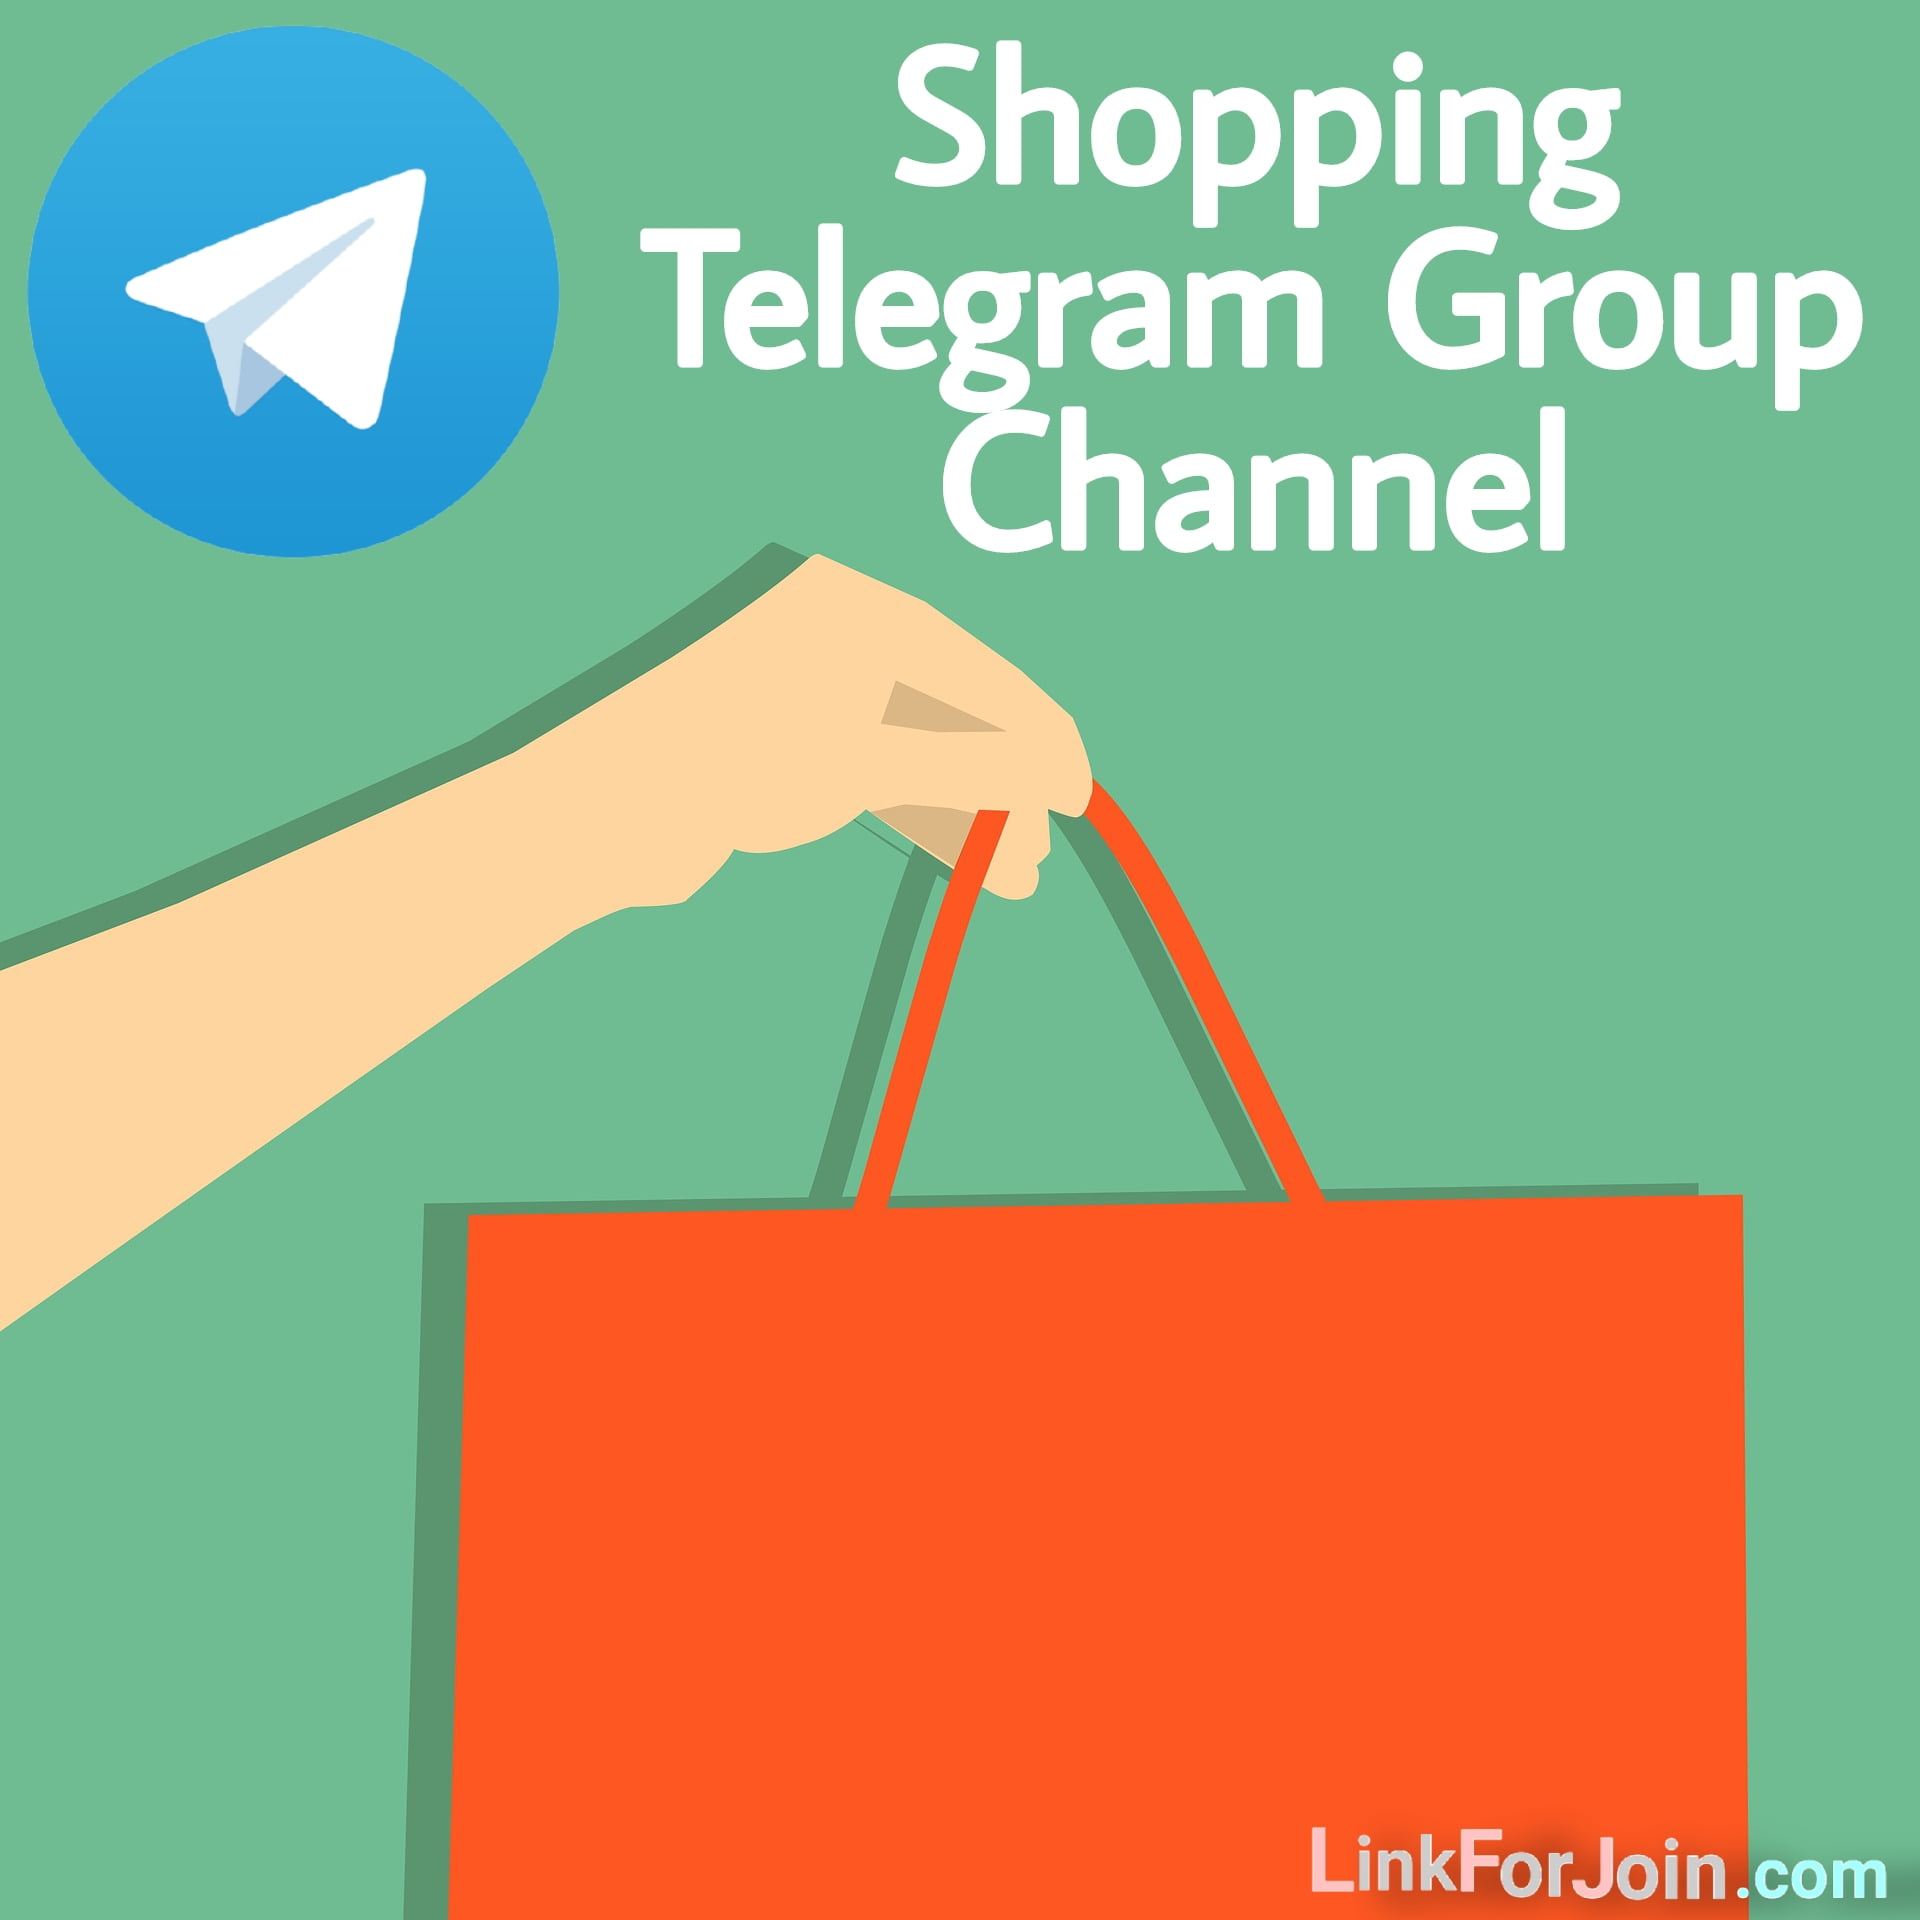 Best shopping channel on telegram in India